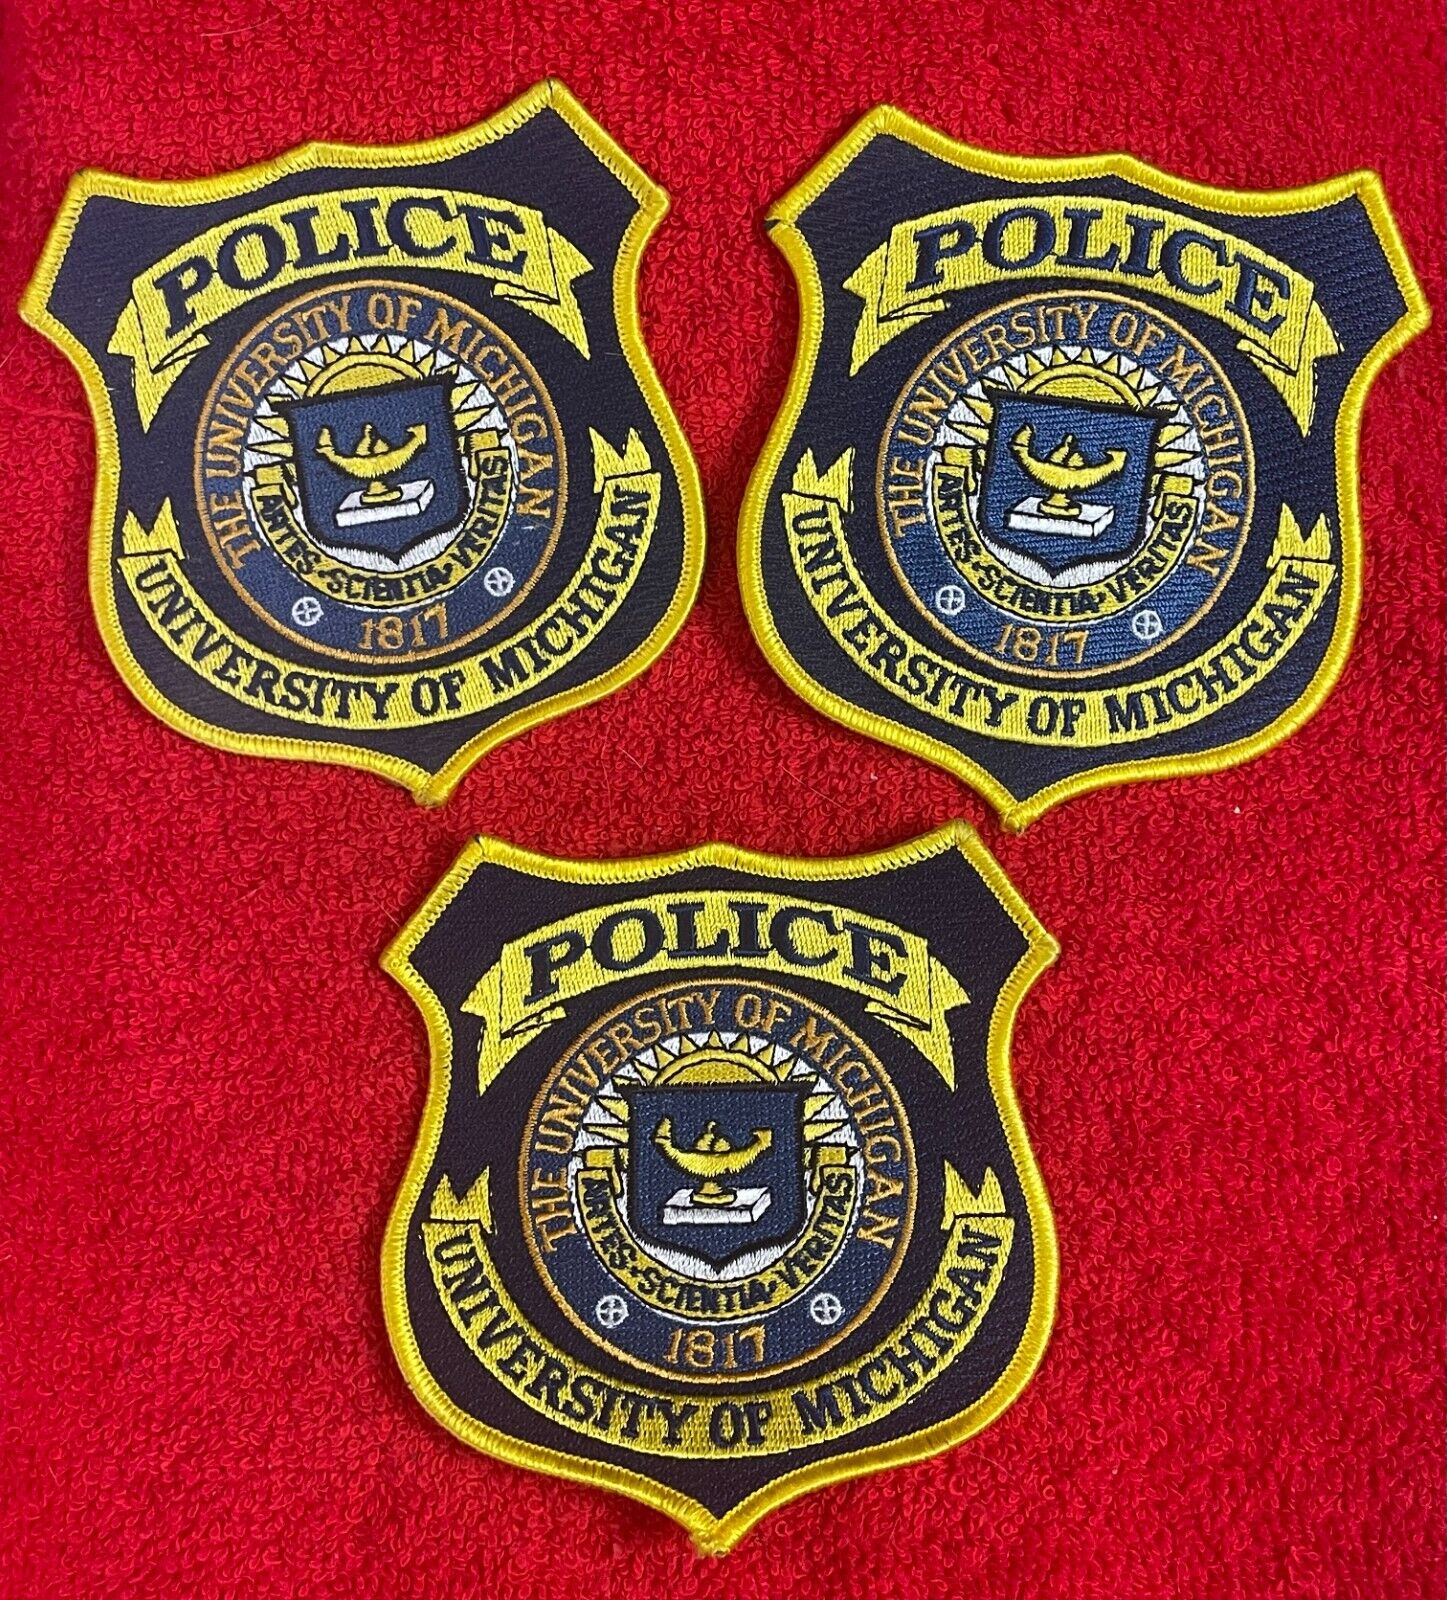 New police patch  The University of Michigan Police Patch 1817